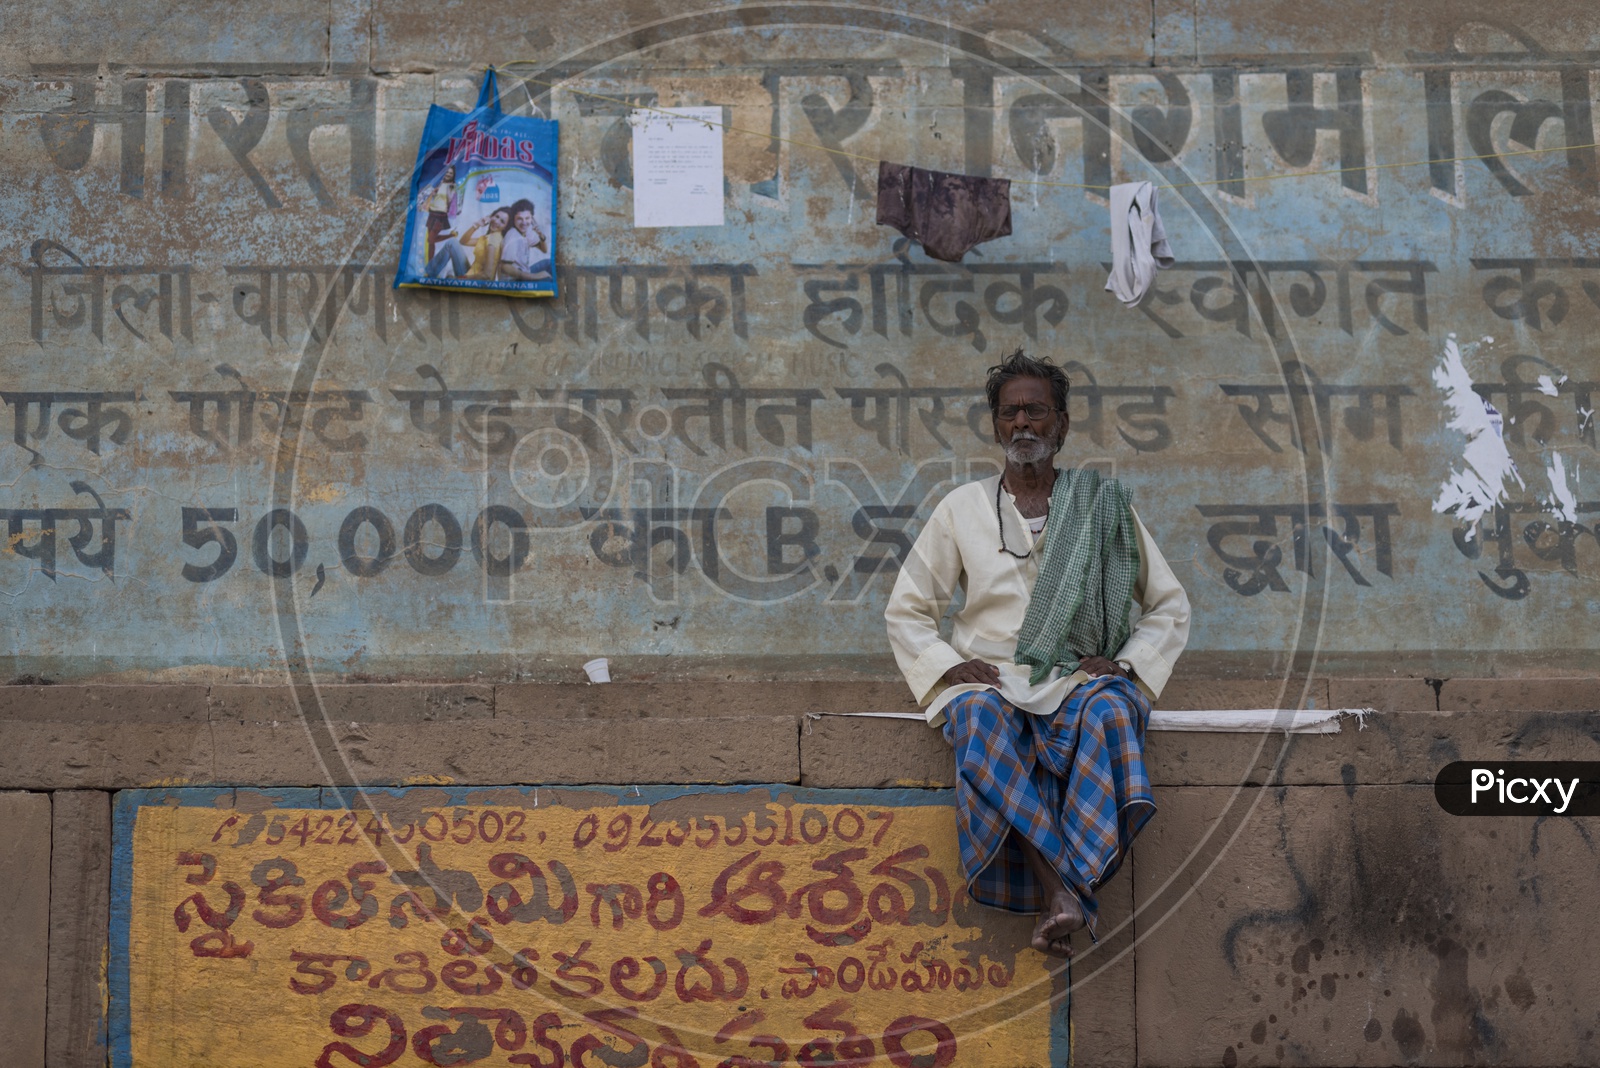 A Telugu Person With His Details Written in Telugu language spotted in Varanasi